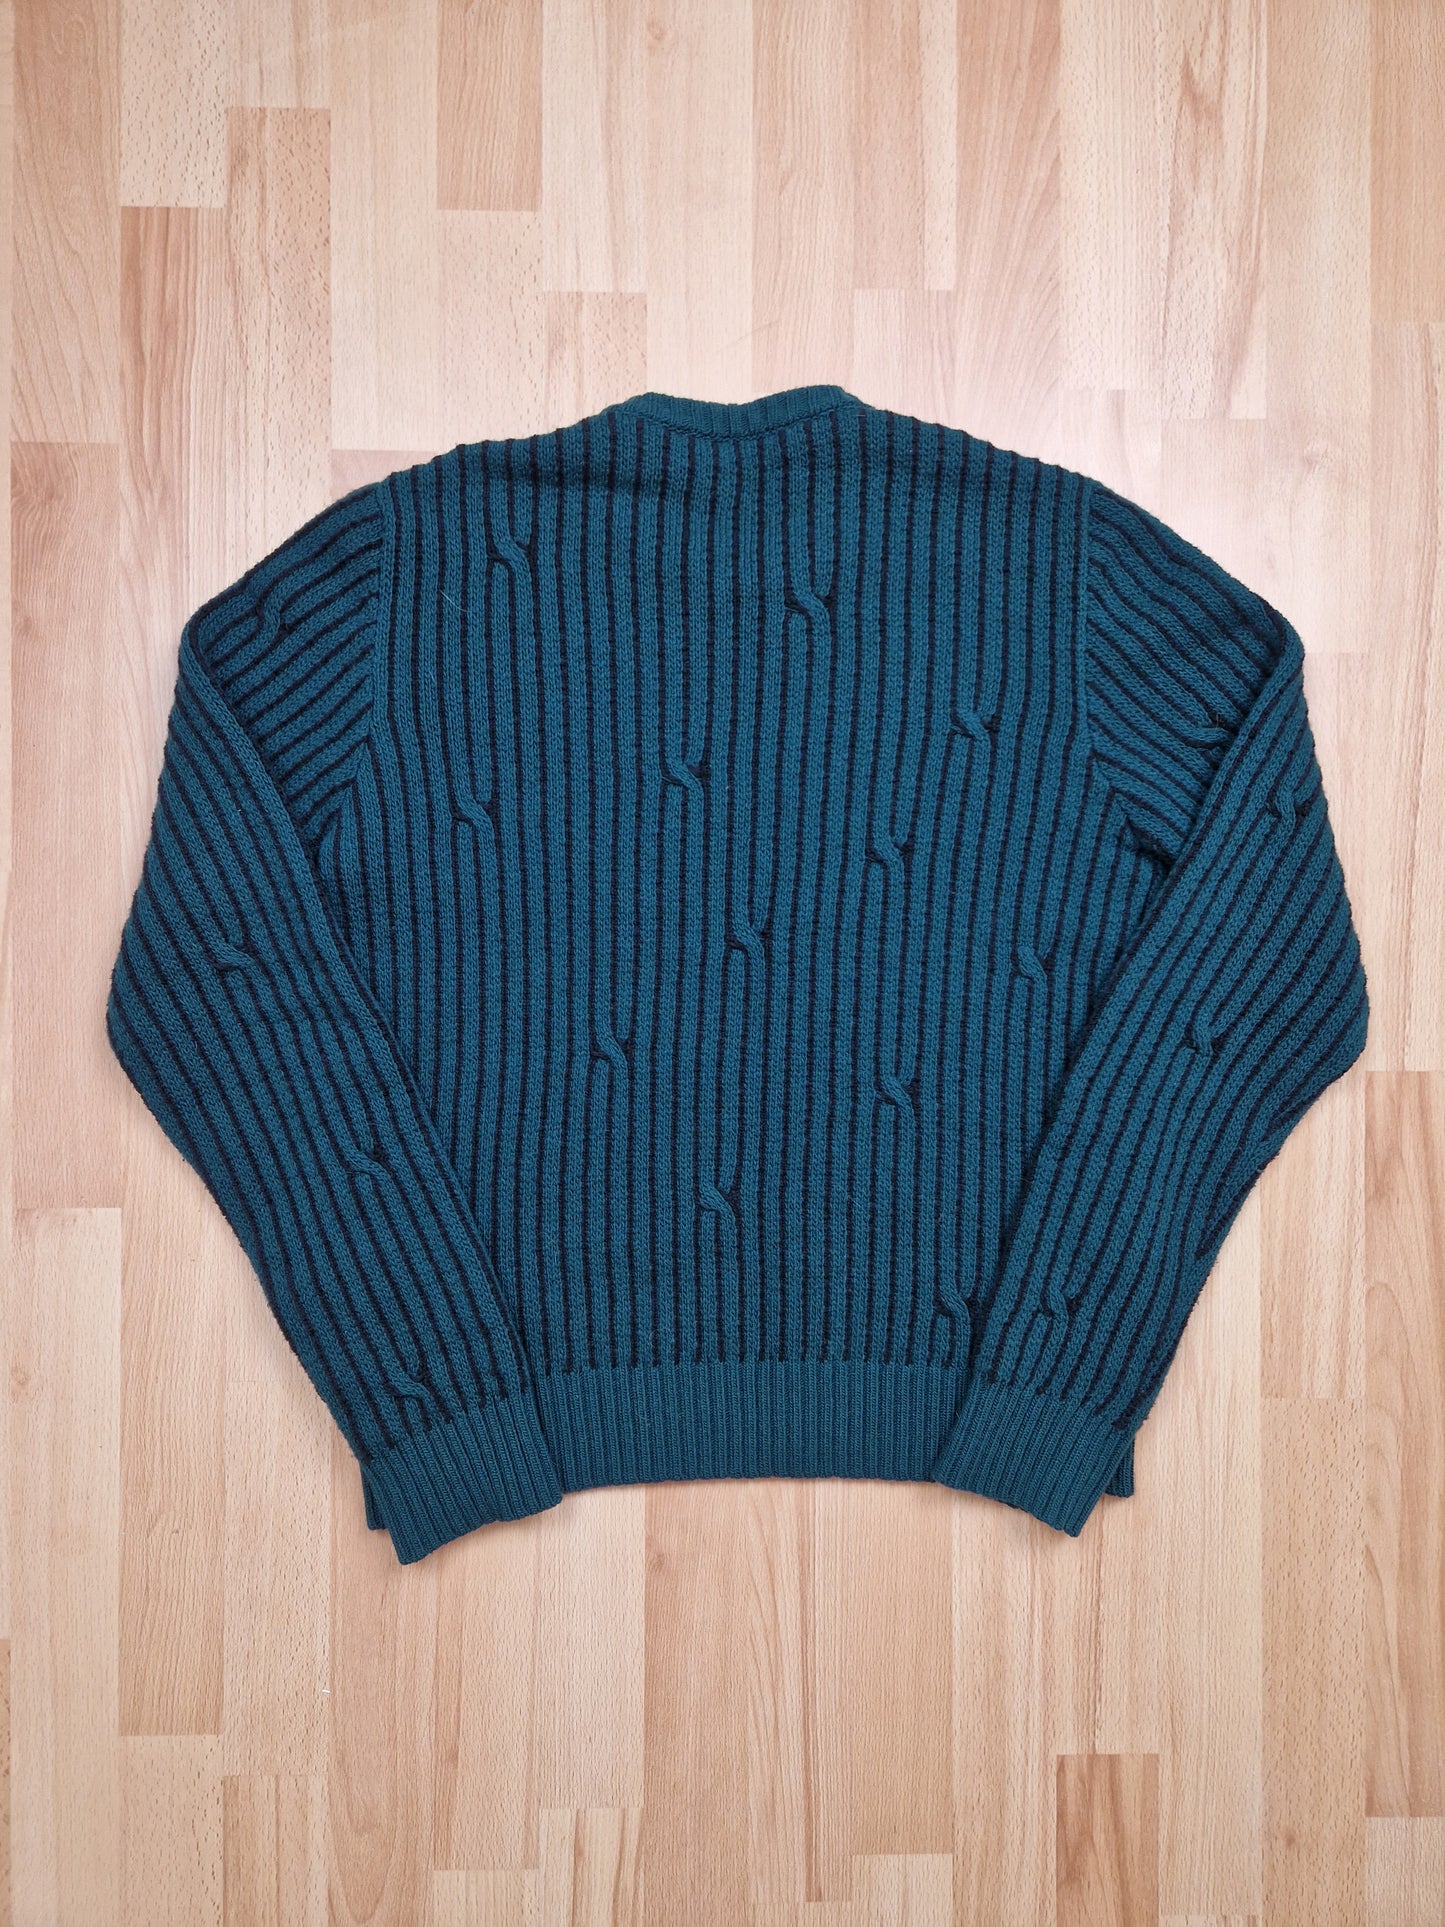 Off-White 'Cables' Knit Sweater (M/L)